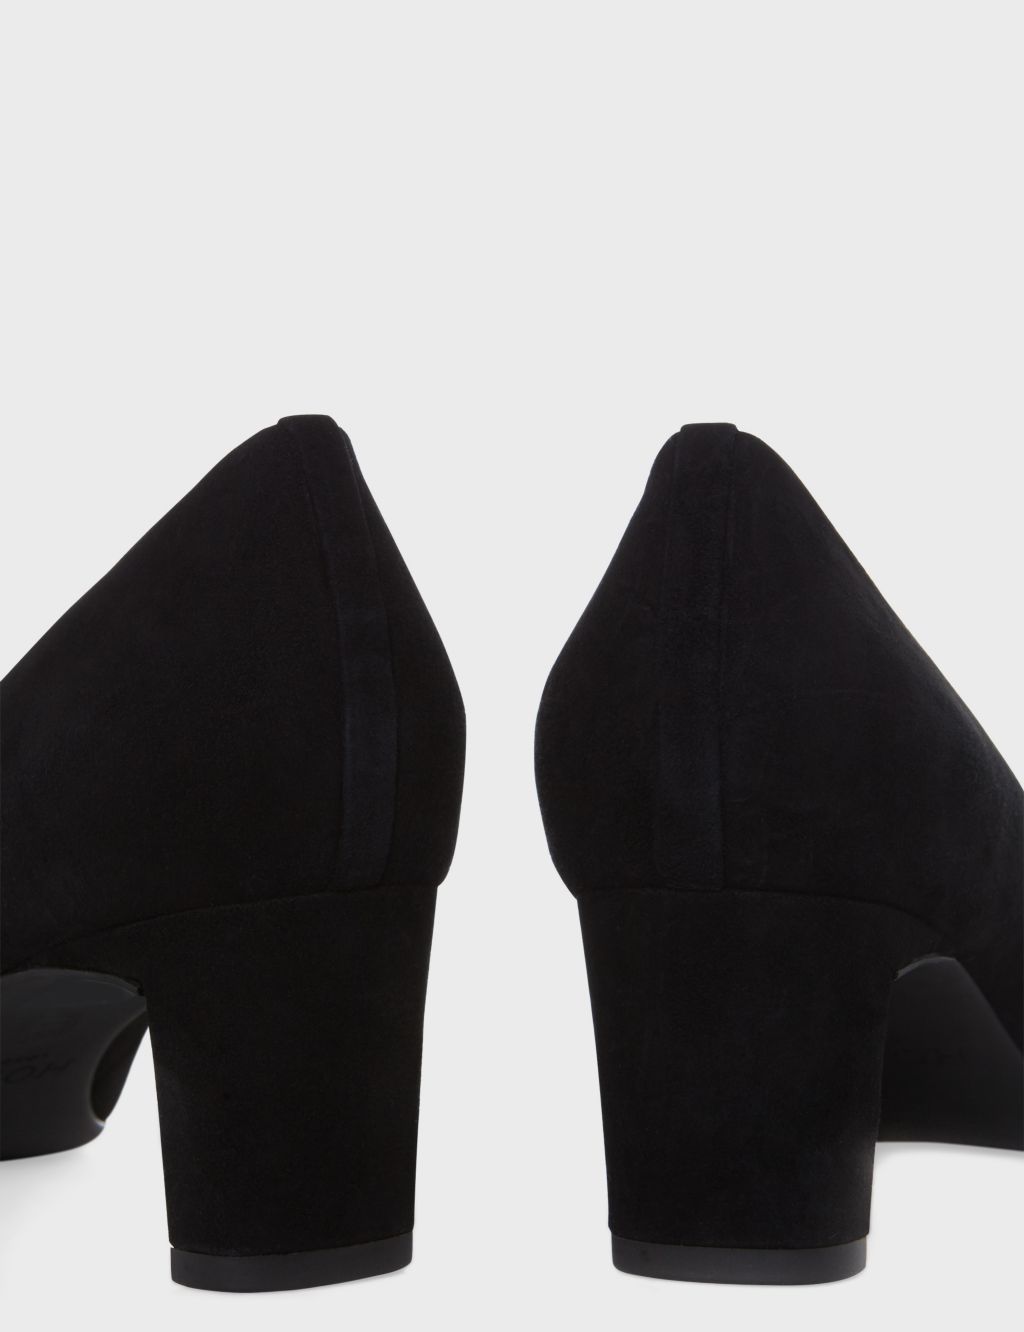 Suede Block Heel Square Toe Court Shoes image 4